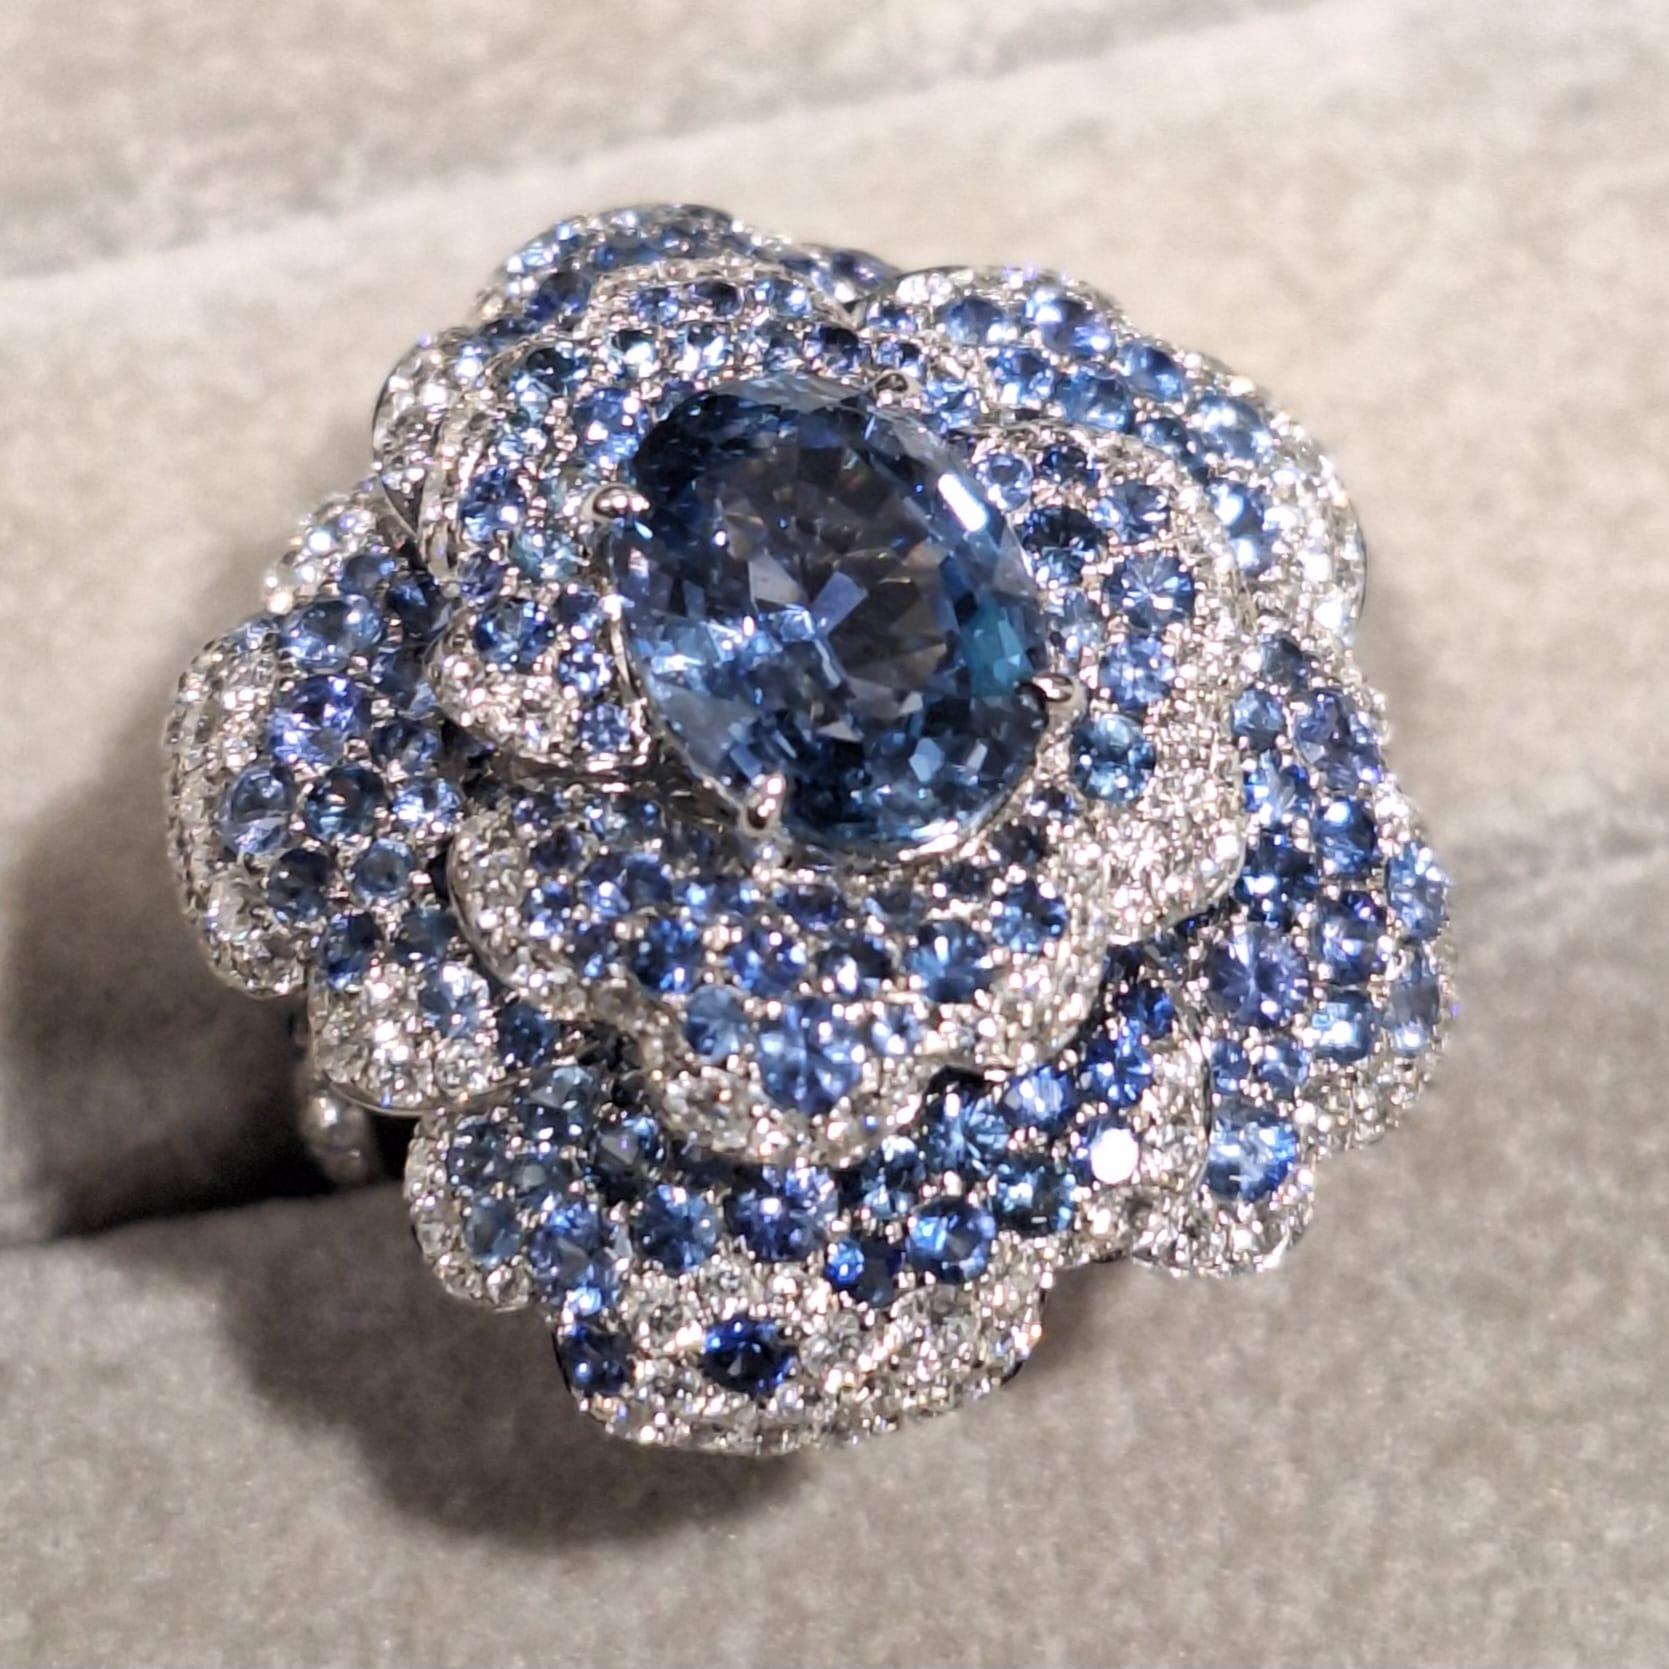 18K White Gold Diamond Ring with Sapphire

Sapphire is believed to promote wisdom, accurate thinking and spiritual truth. It is believed to be connected with the throat and the conscience, allowing the wearer to access a deeper understanding of